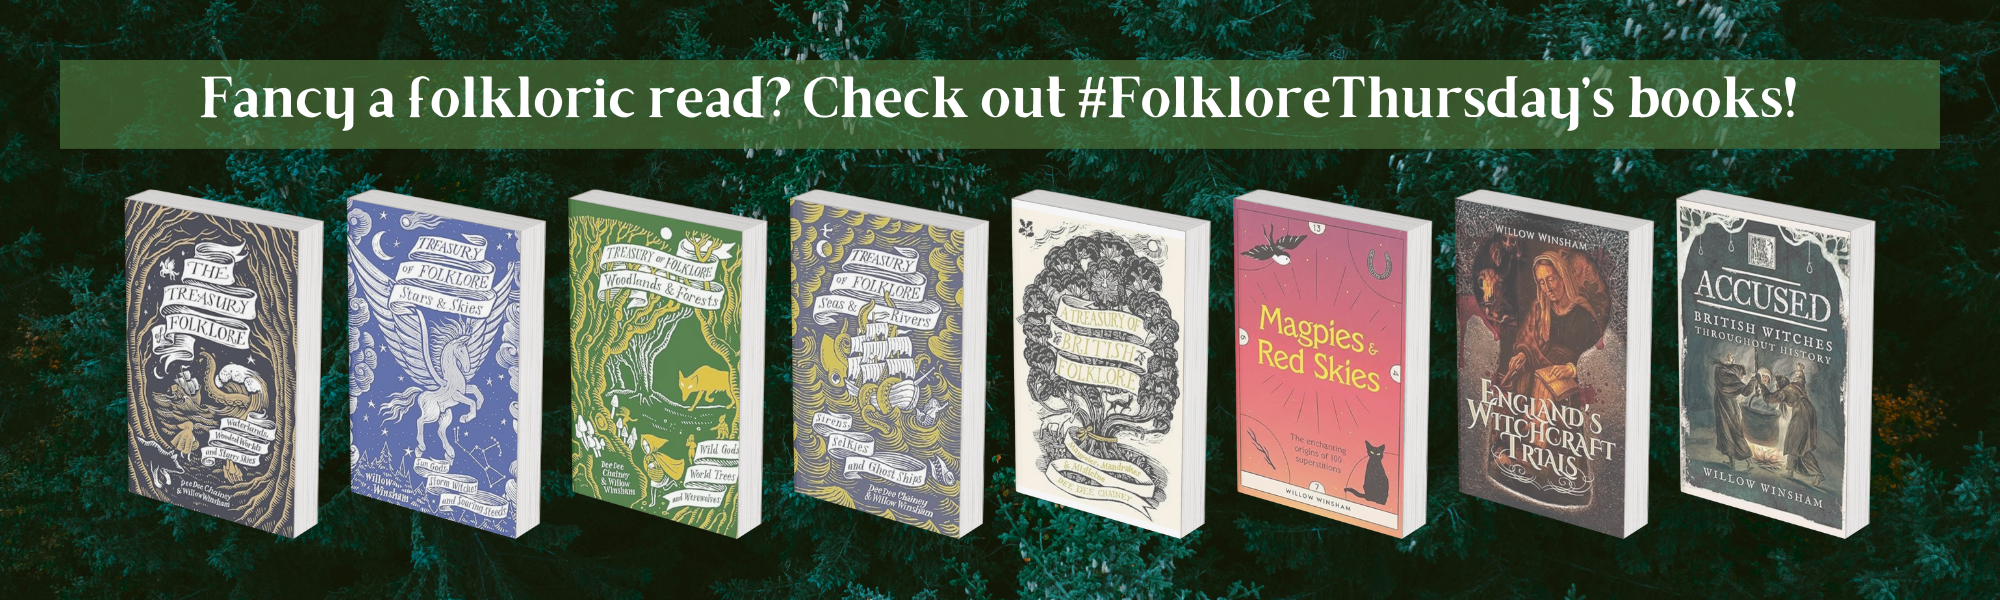 Fancy a folkloric read? Check out #FolkloreThursday’s books!